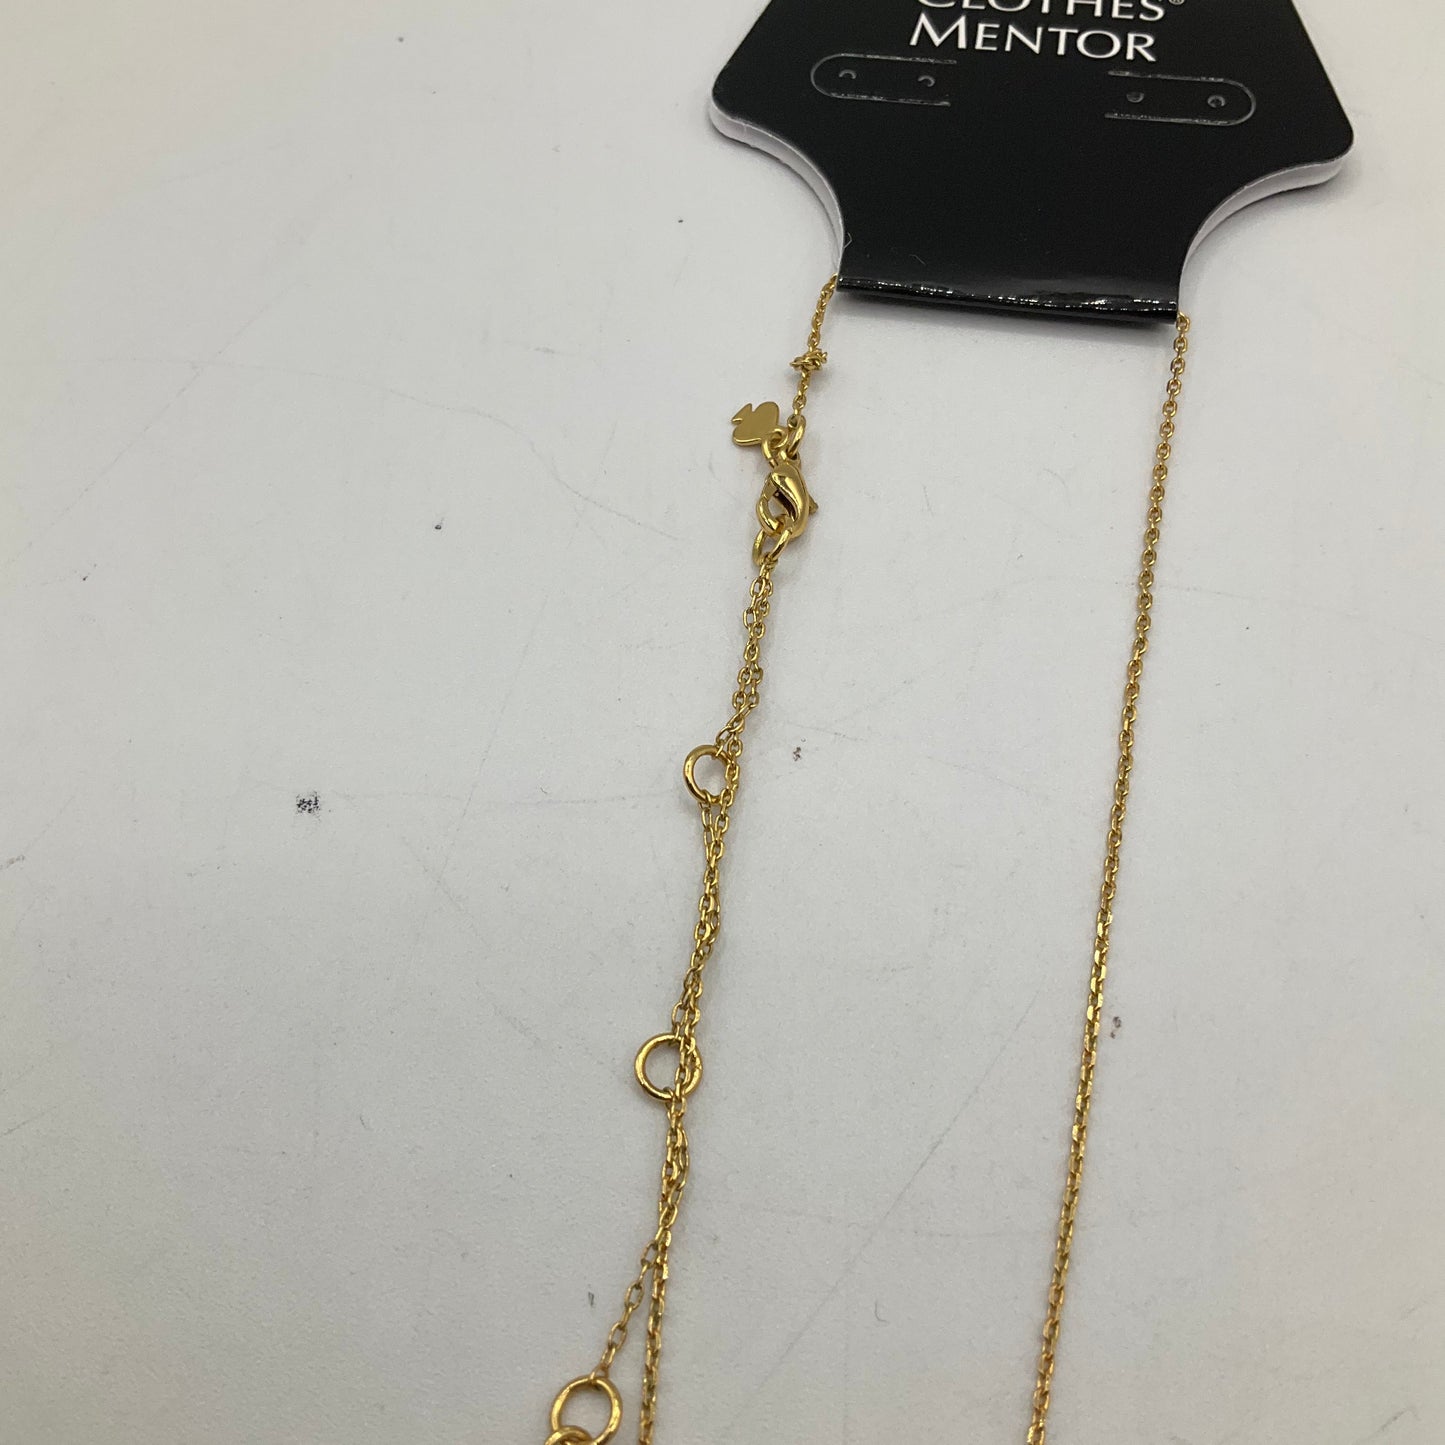 Necklace Charm Kate Spade